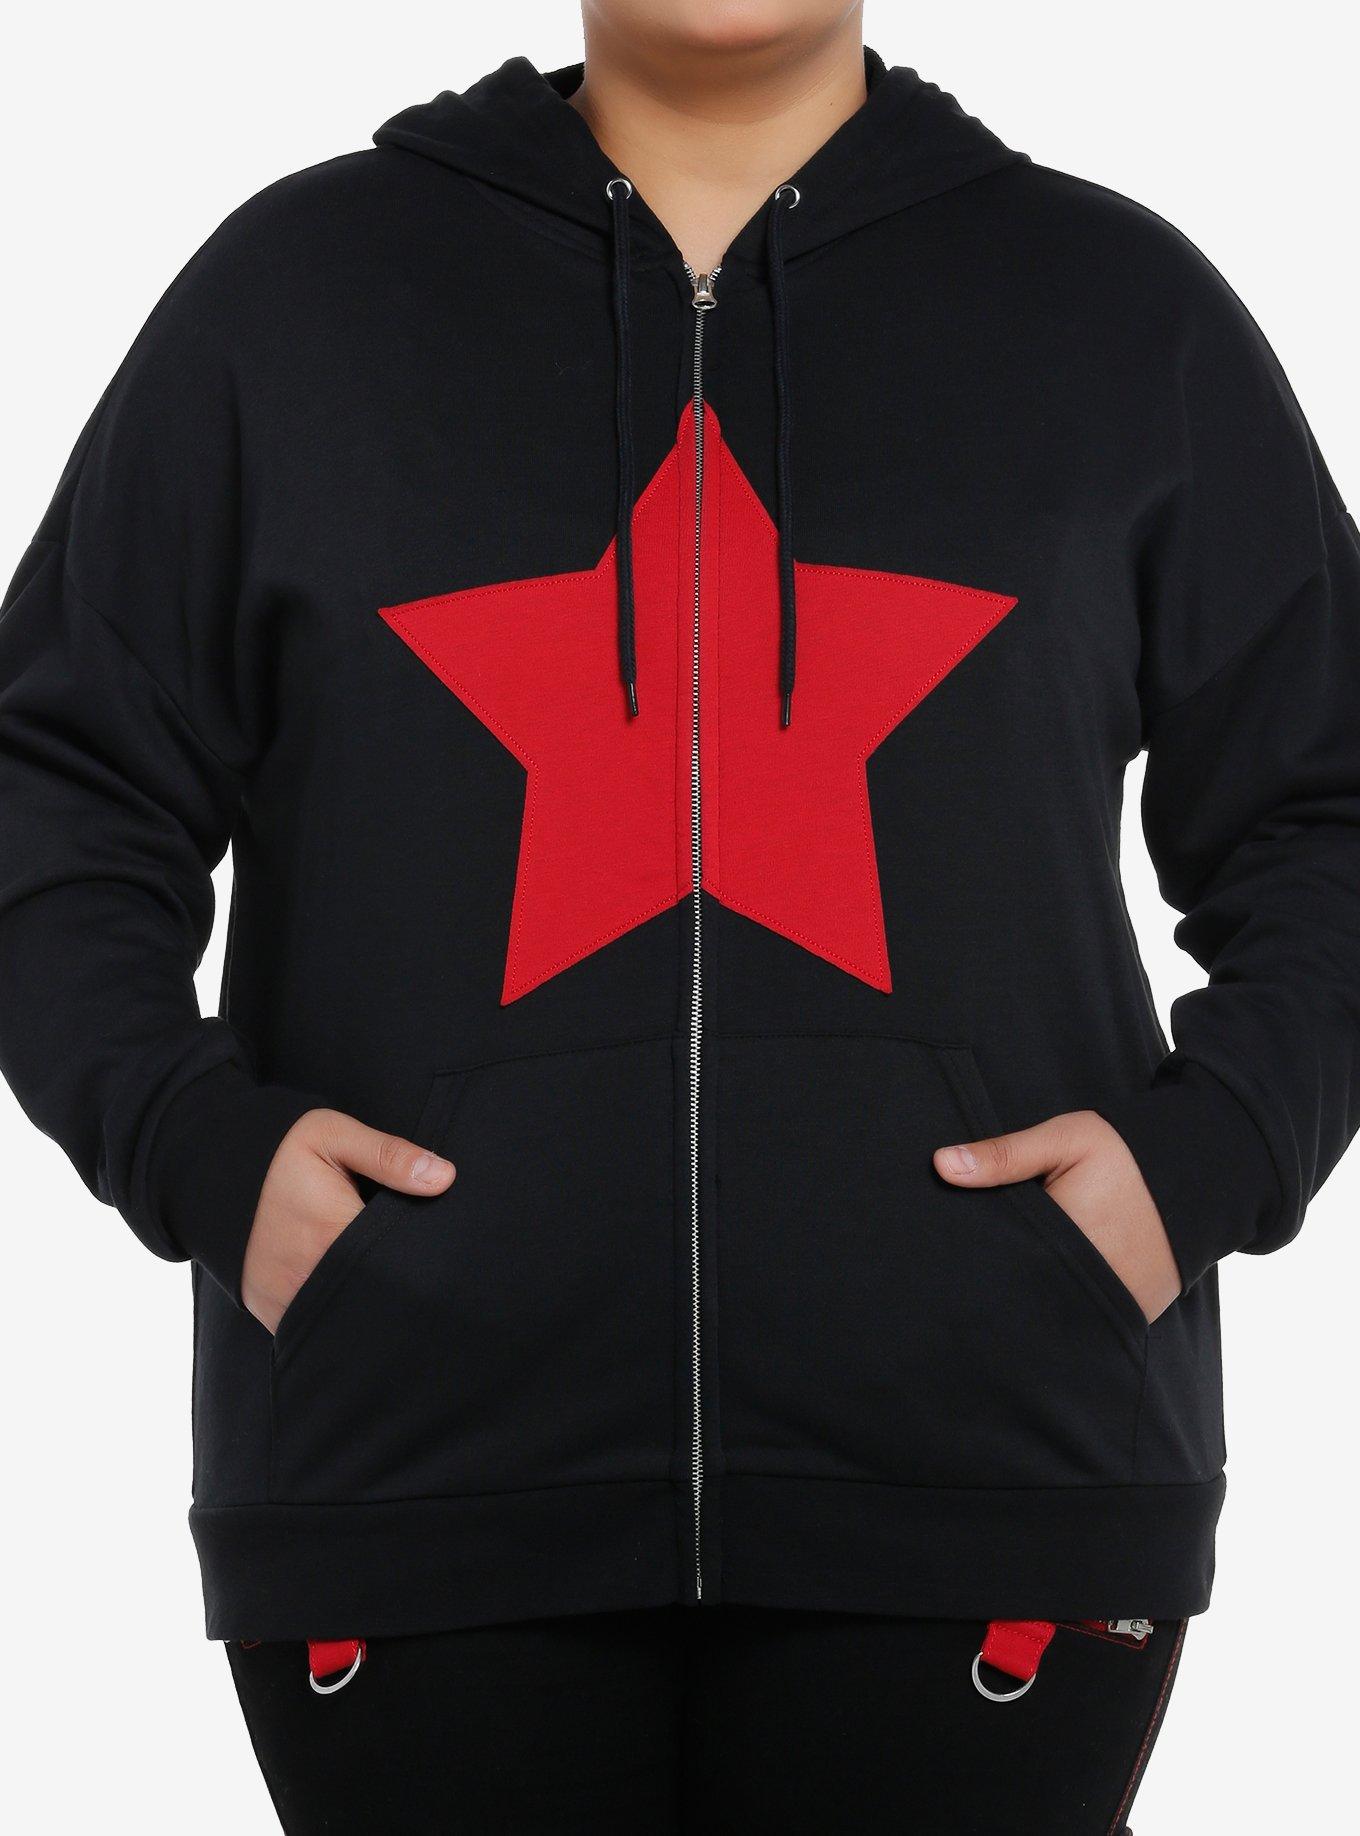 Social Collision Red Star Girls Hoodie Plus Size, RED, hi-res